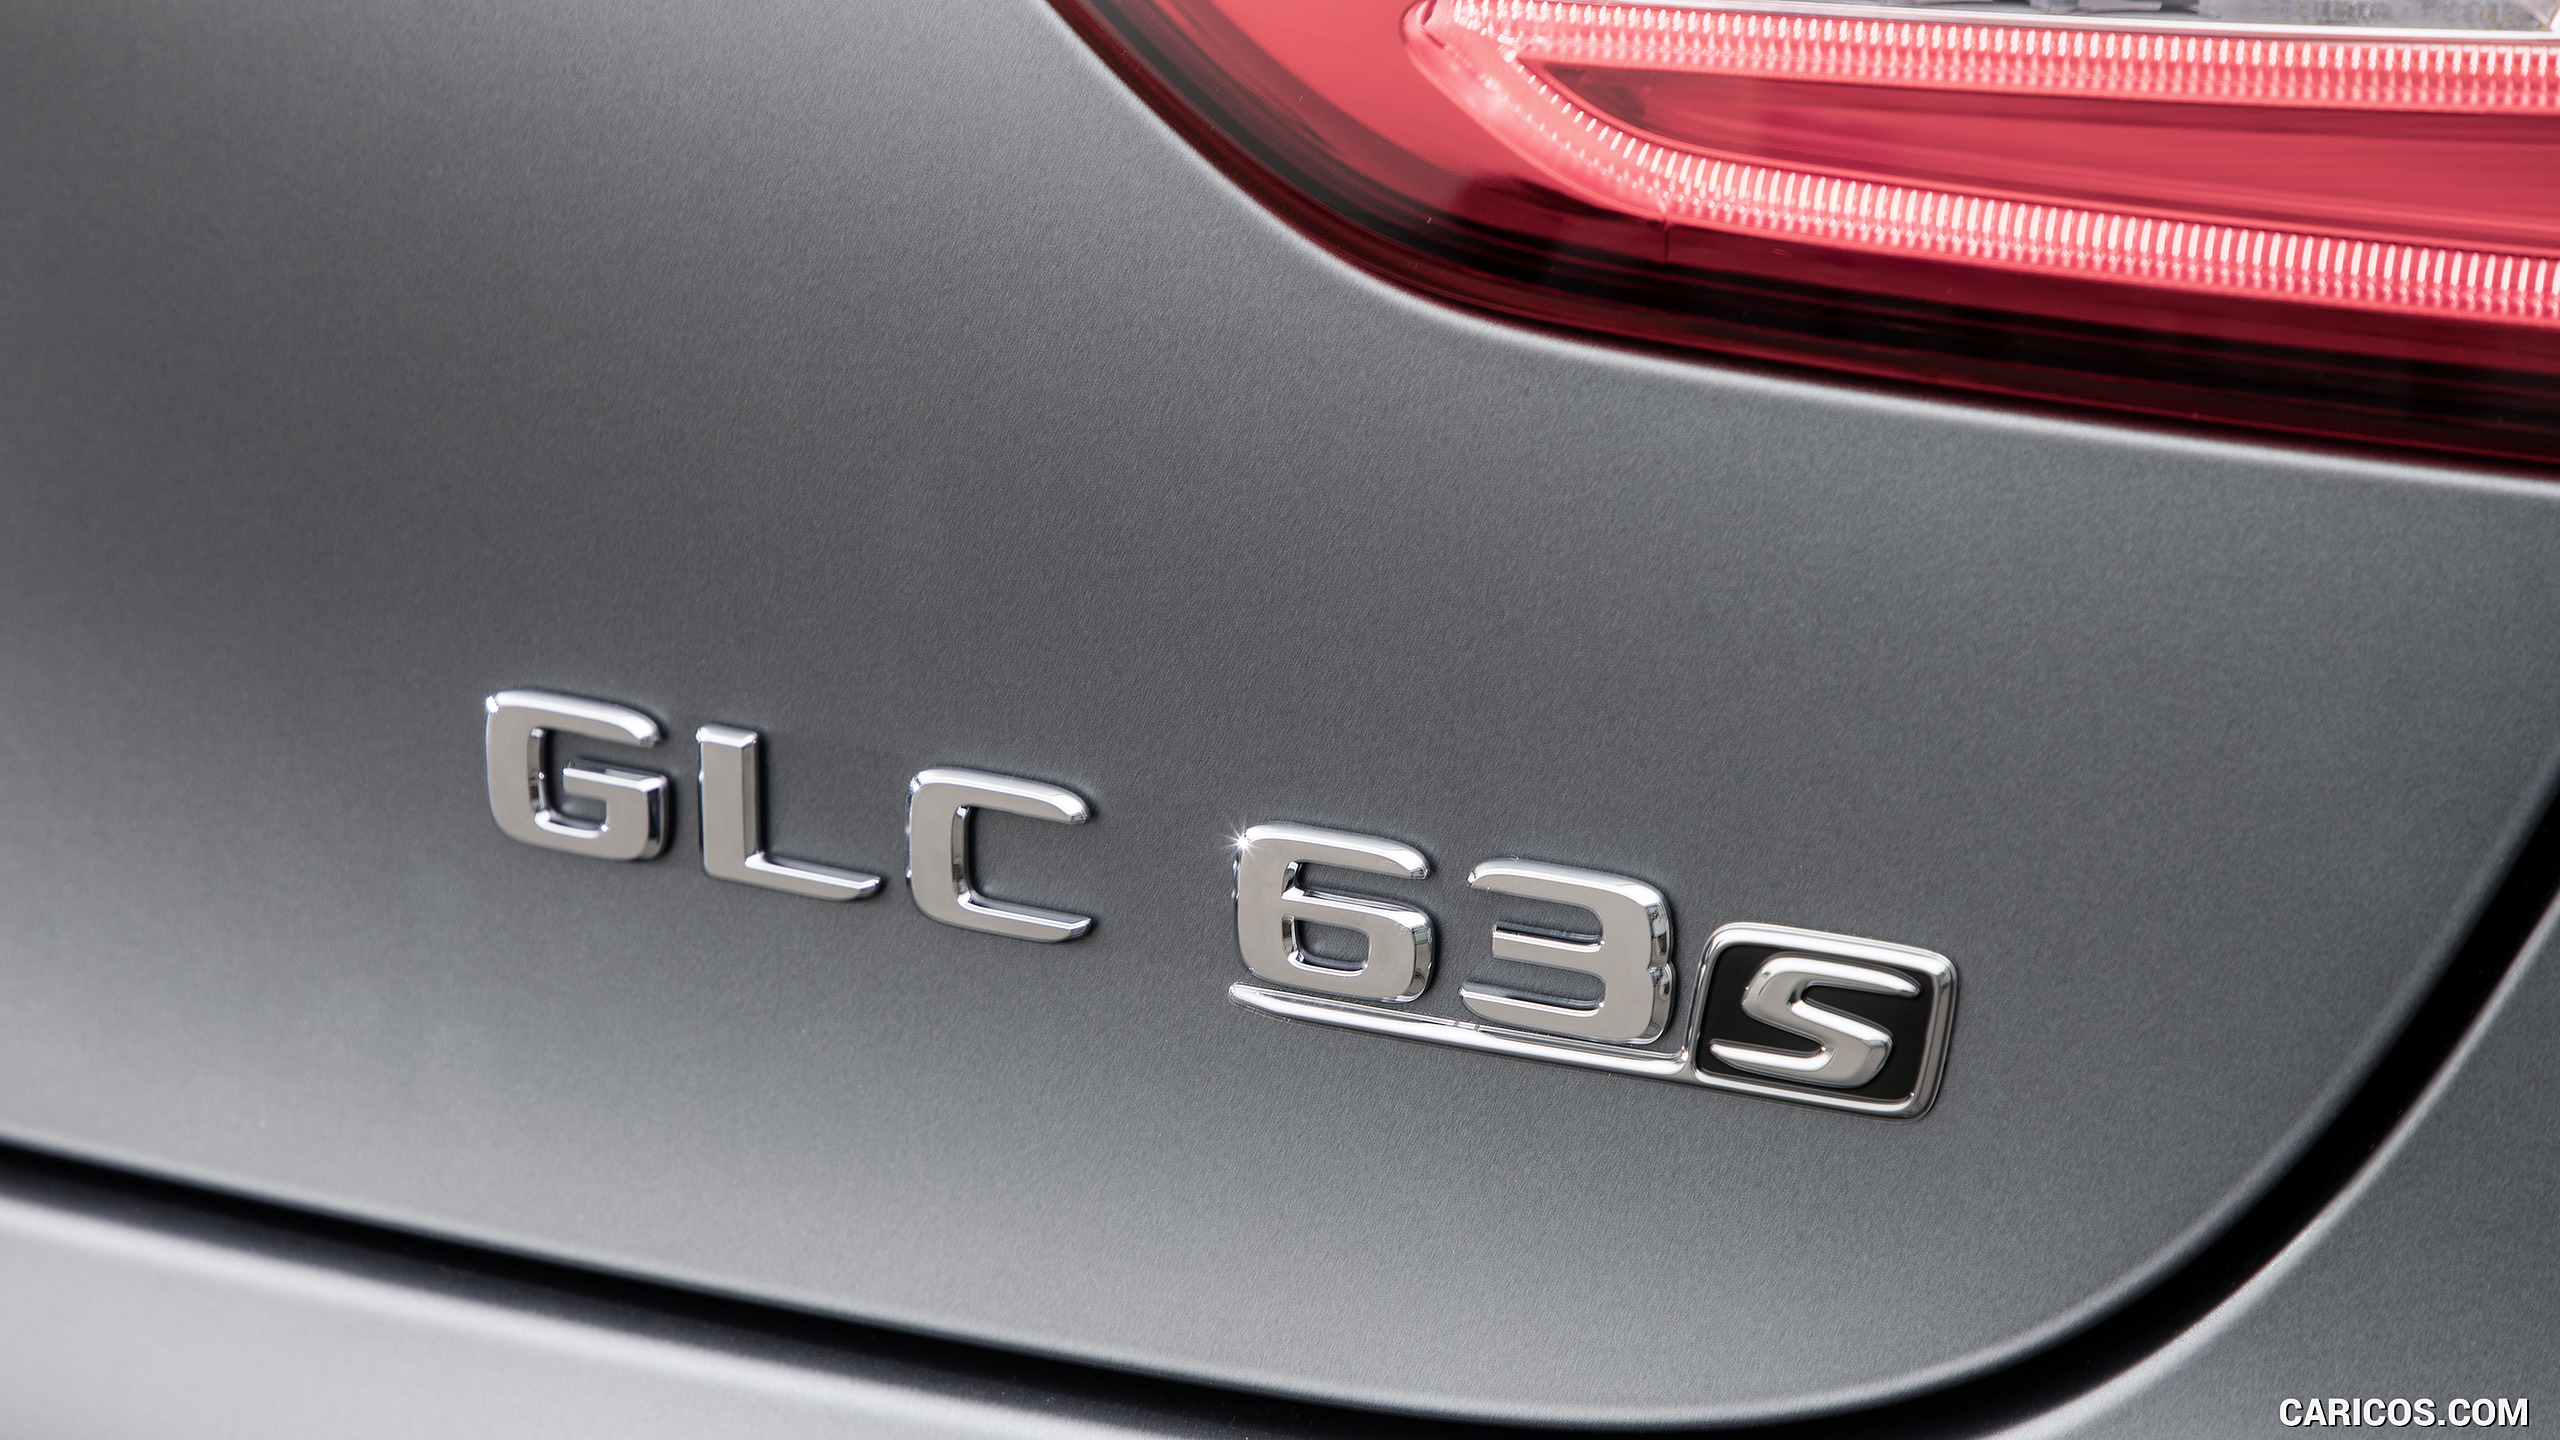 2018 Mercedes-AMG GLC 63 S Coupe 4MATIC+ Edition 1 - Badge, #28 of 75